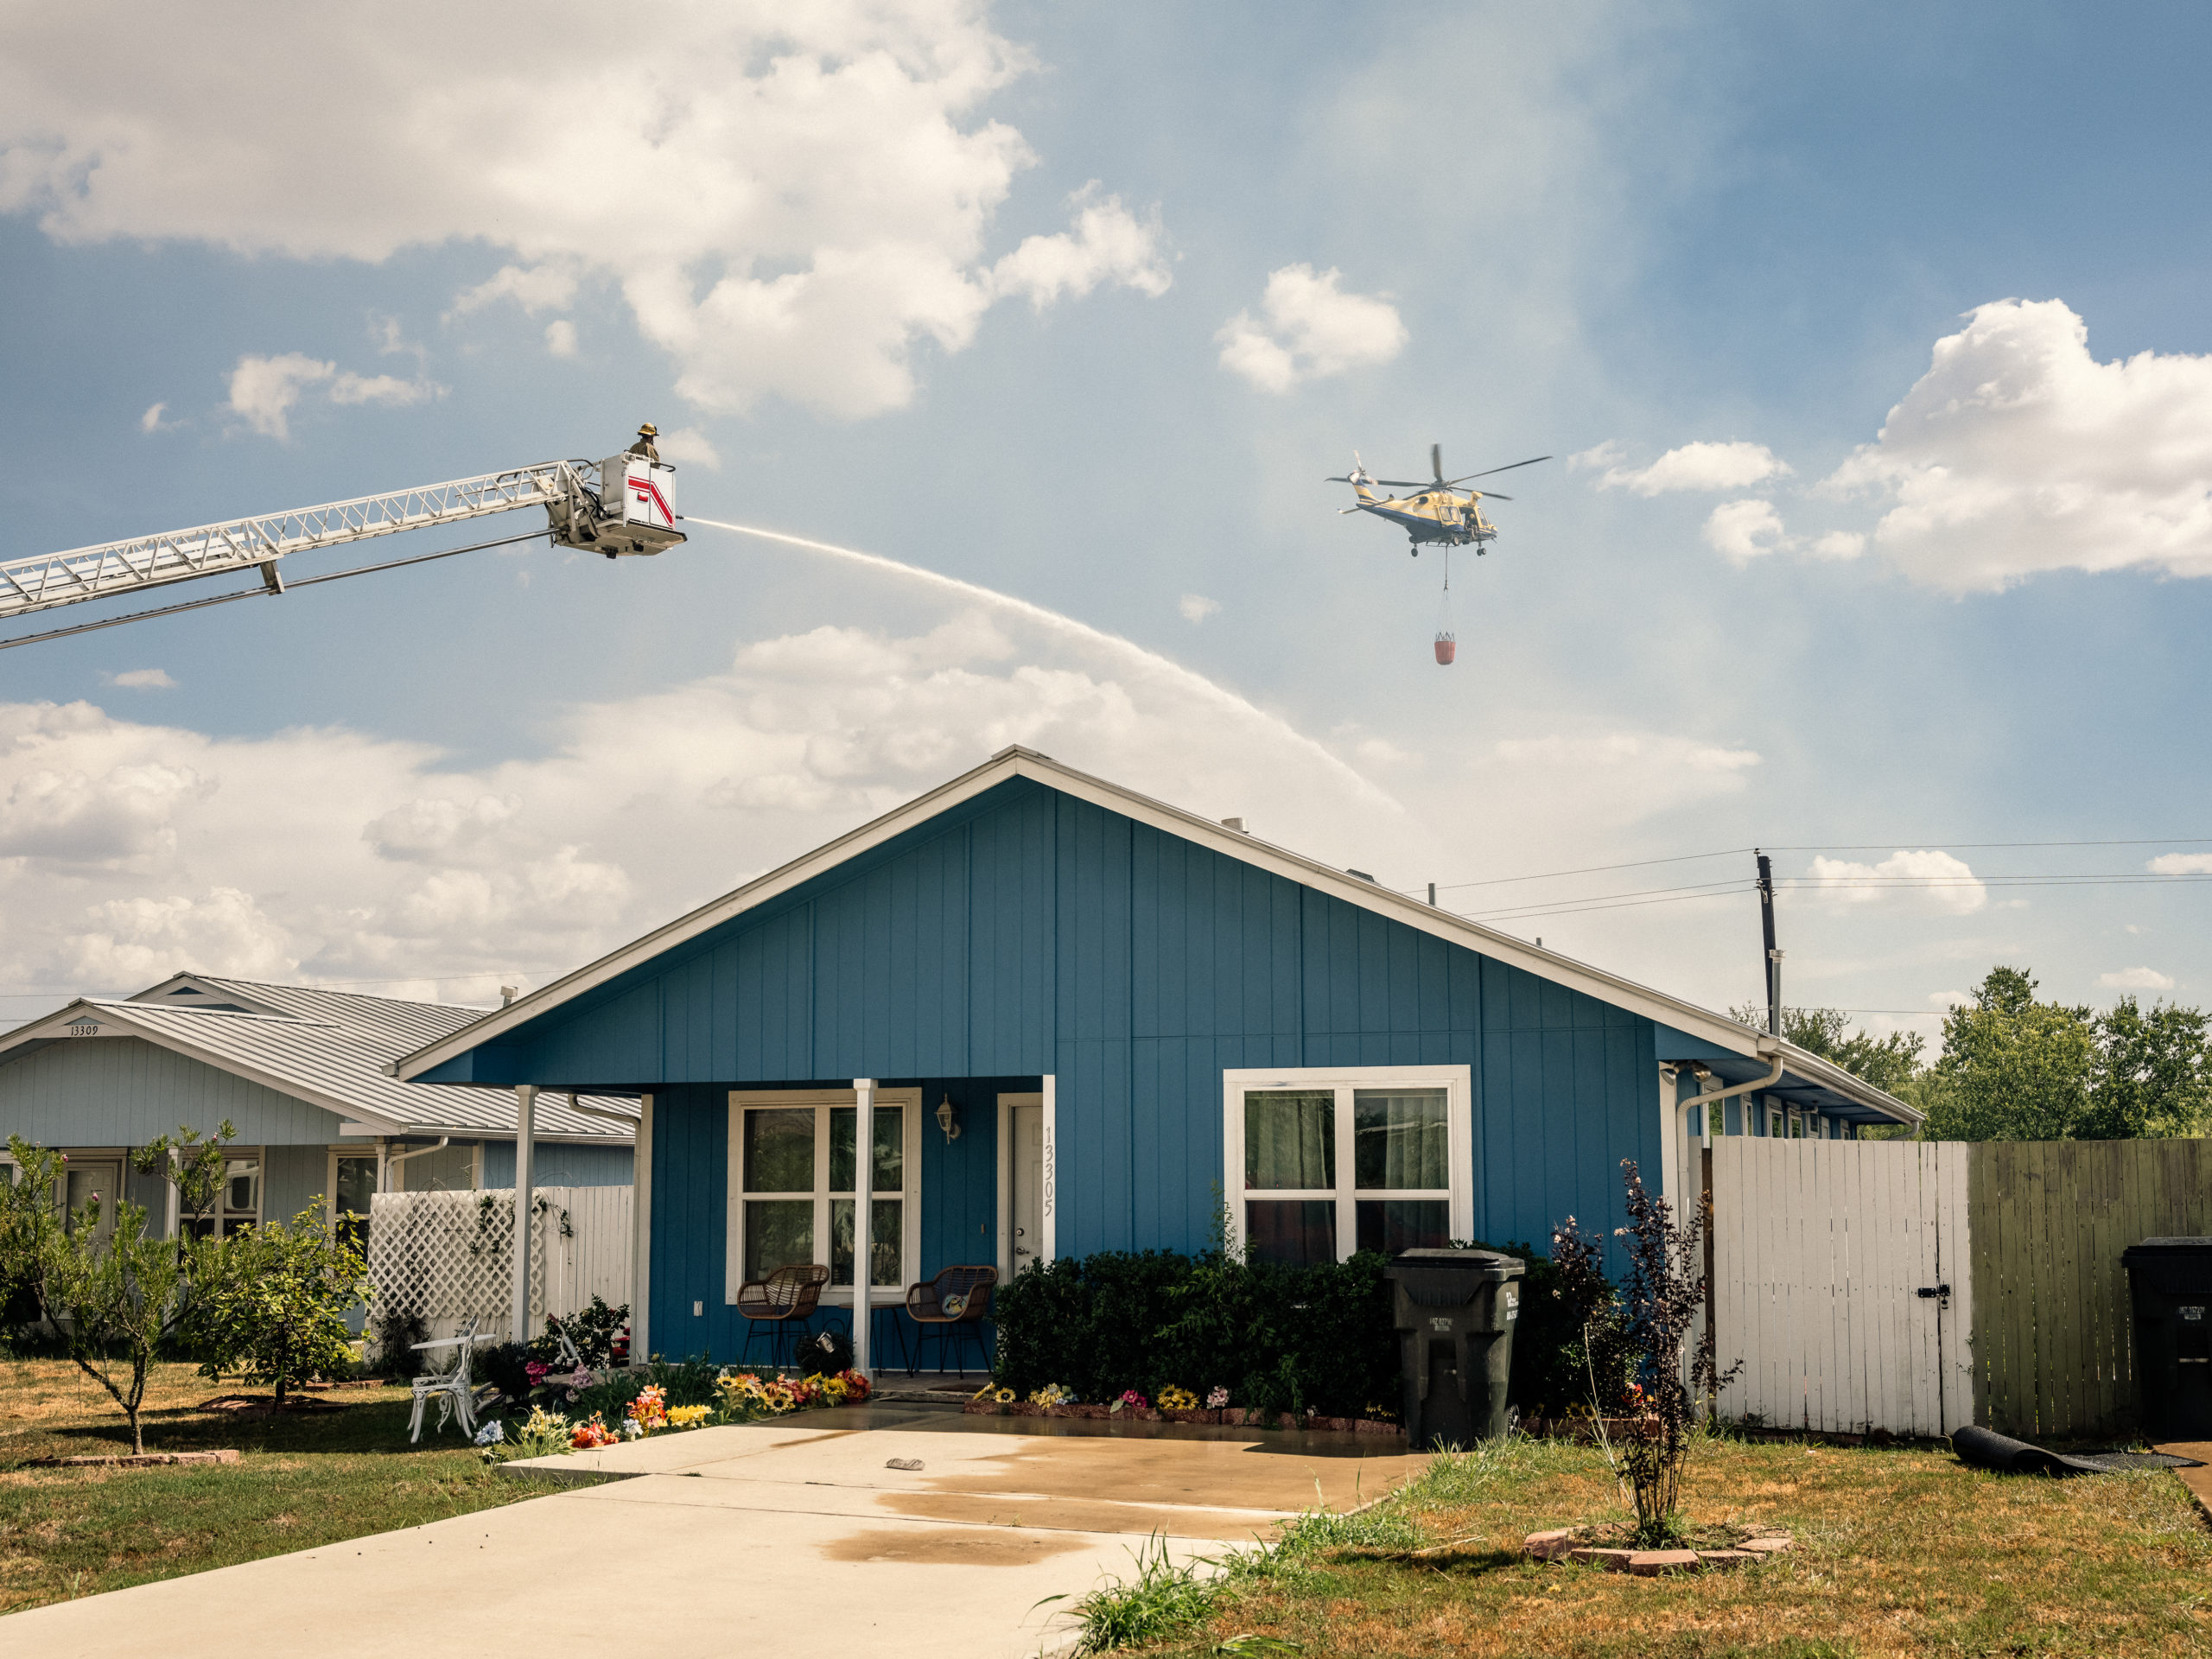 A fire fighter on an extended ladder, and a helicopter are used to spray water onto a brush fire behind a residential home.